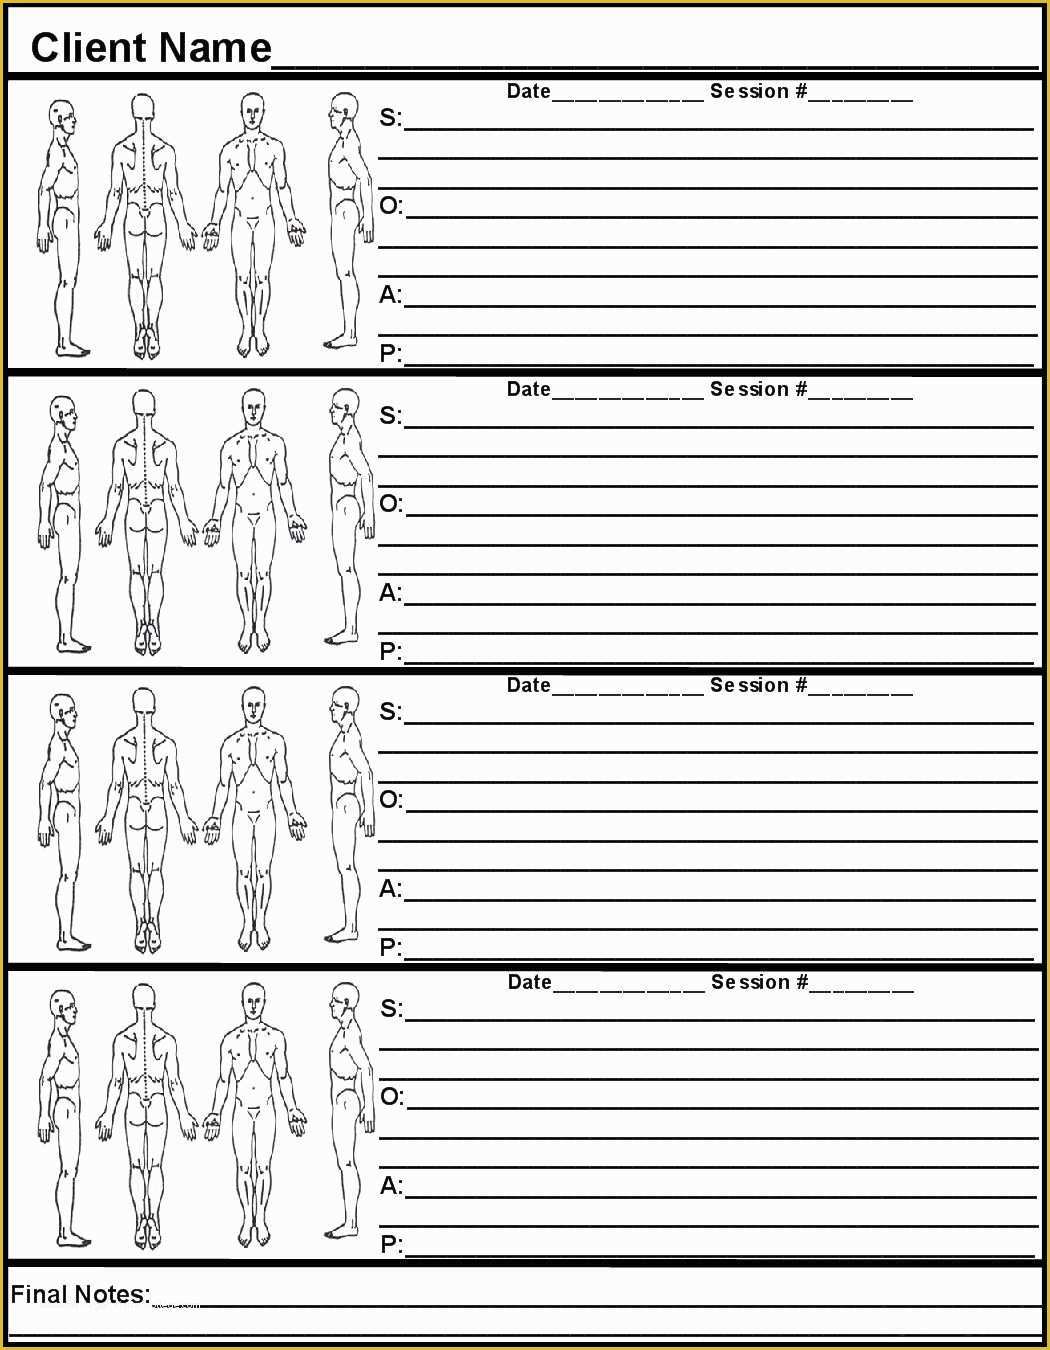 Chiropractic soap Notes Template Free Of Free Massage soap forms Resources & Downloads